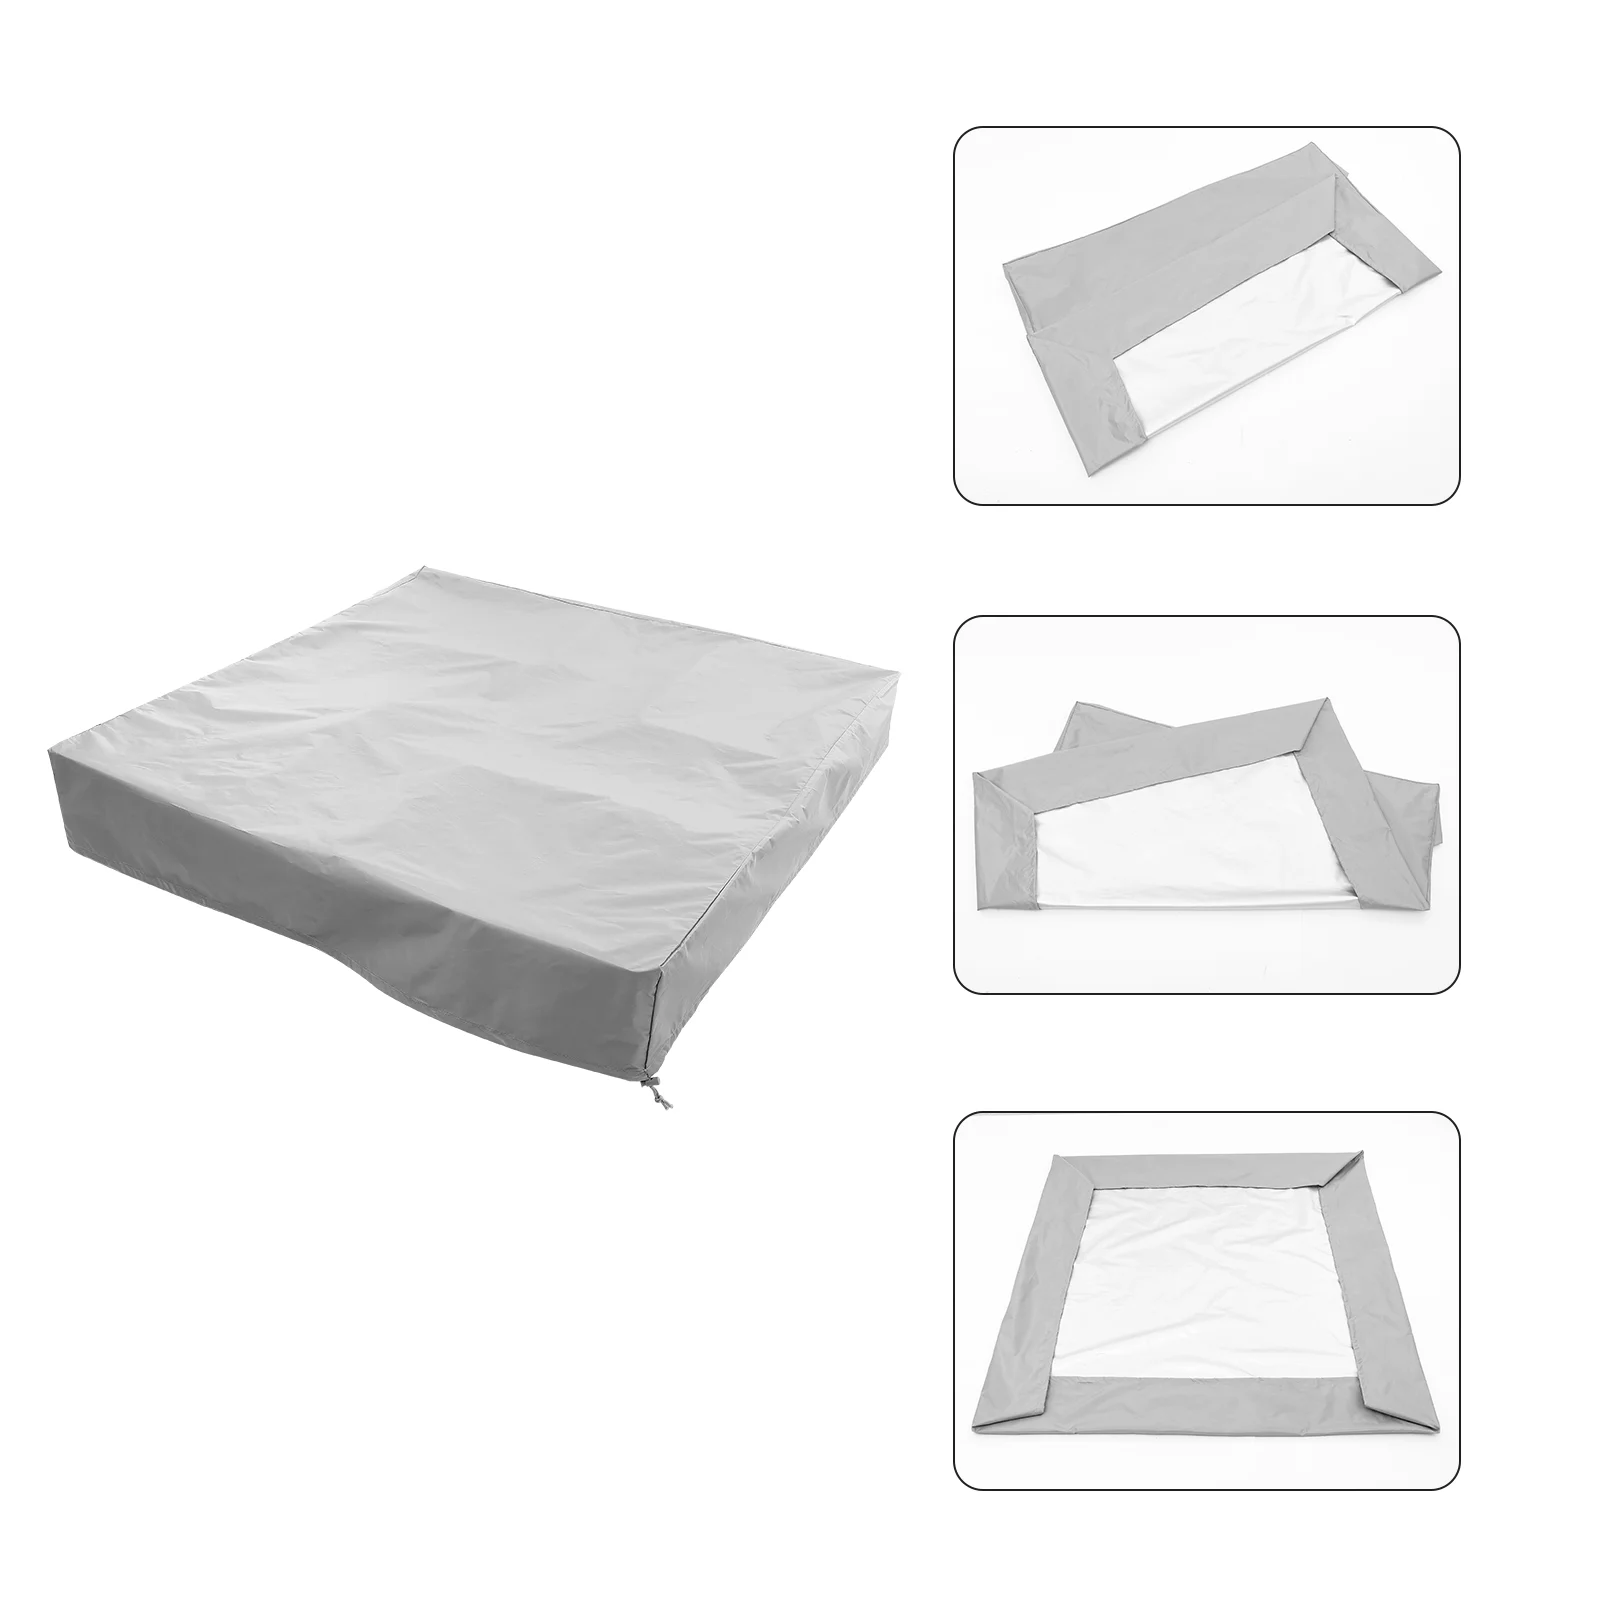 

Plastic Pool Kids Bunker Cover Sand Pit Canopy 120X120X20CM Small Bath Protective Grey Polyester Taffeta Child